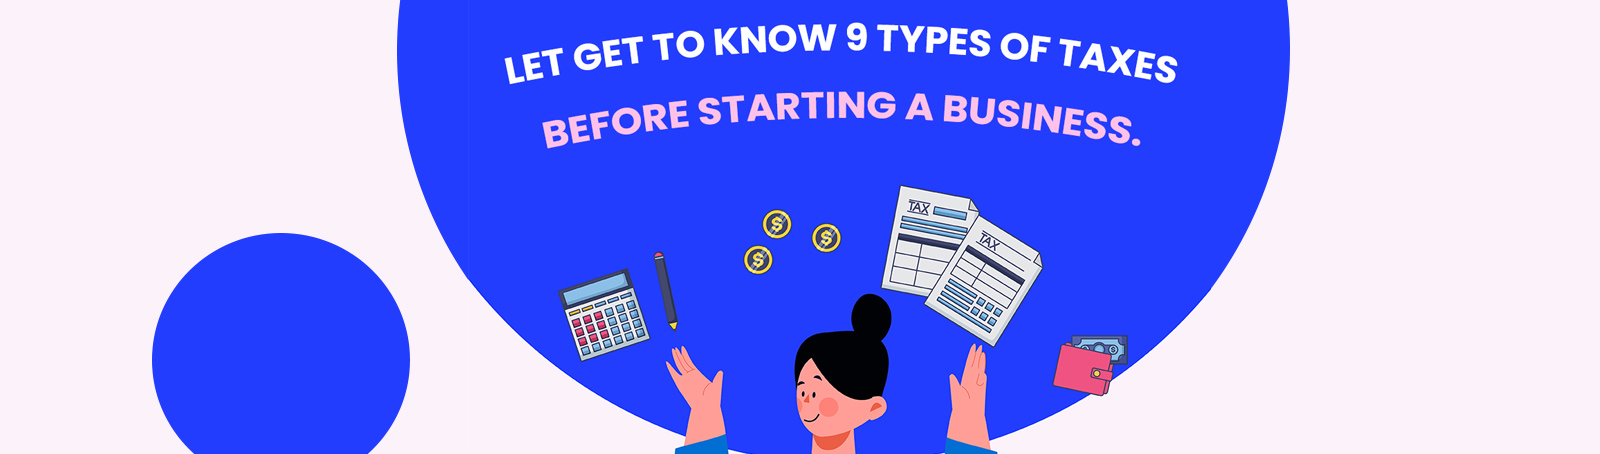 9 types of taxes before starting a business